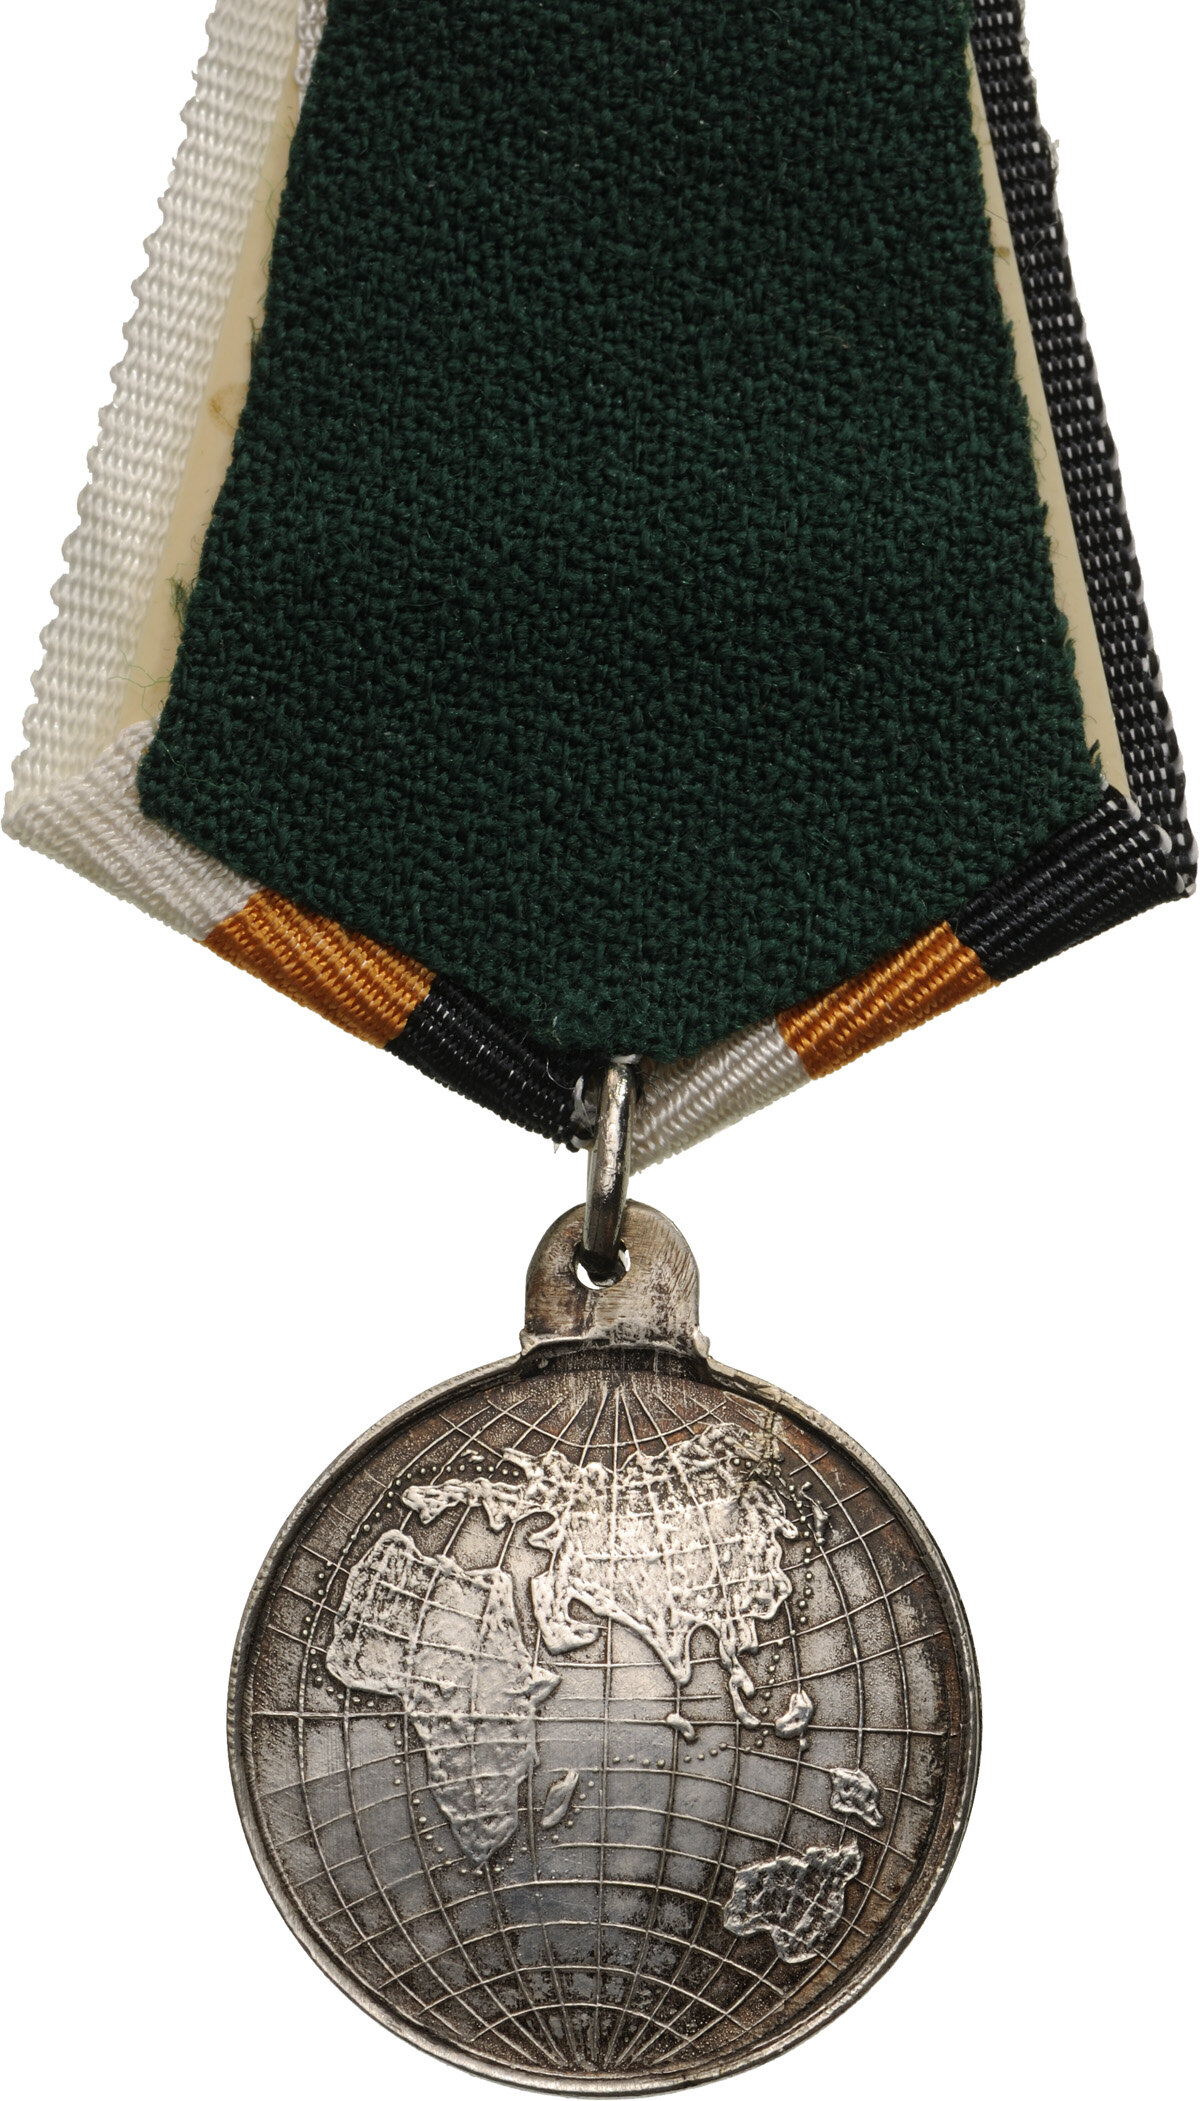 Medal for the Far East Naval Expedition of 1904-1905 - Image 2 of 2